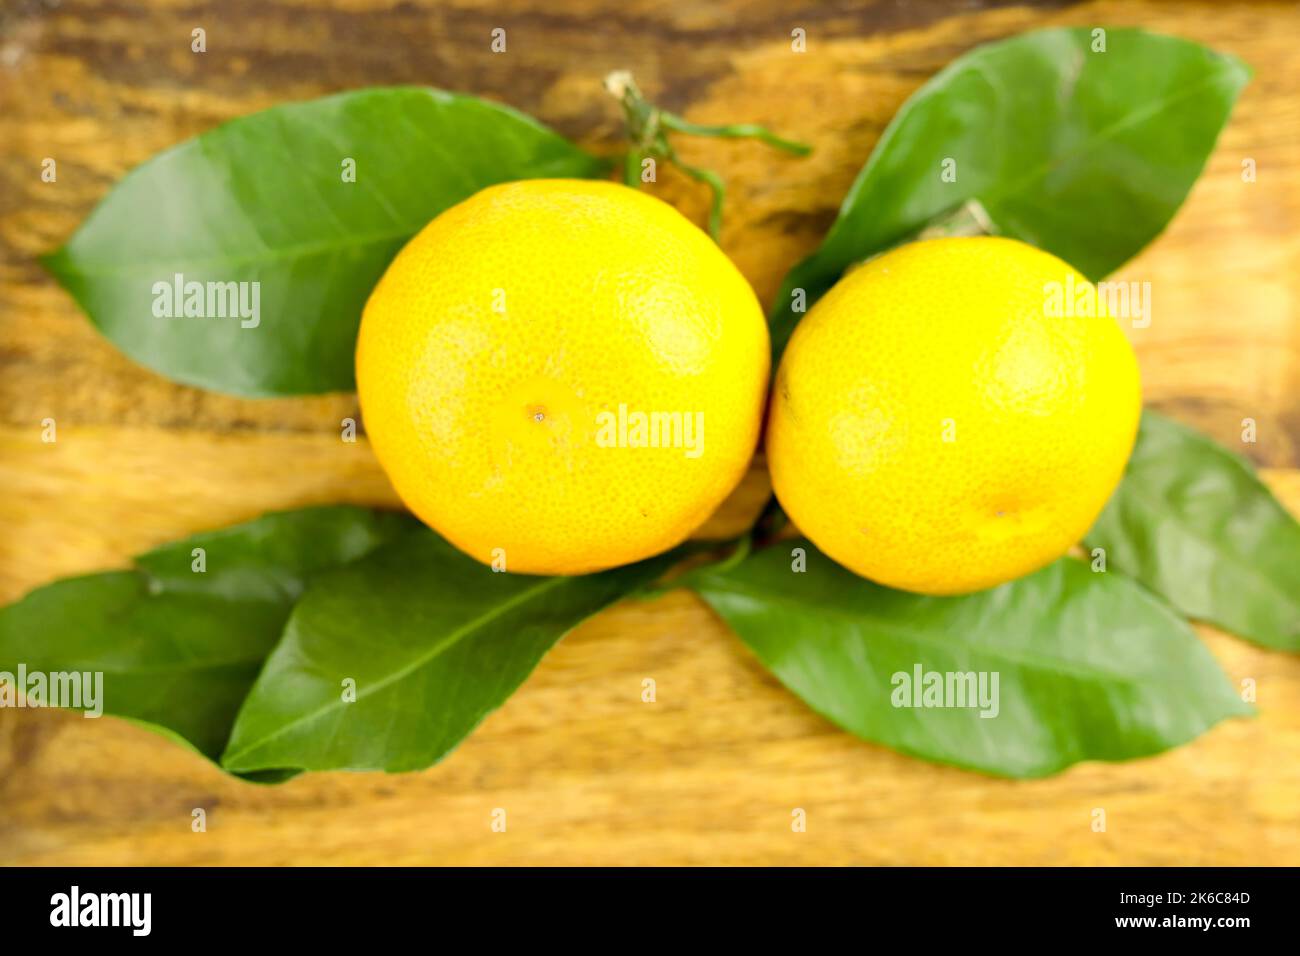 Yellow whole mandarins or tangerine fruits on green leaves on wooden background. Close-up. Stock Photo